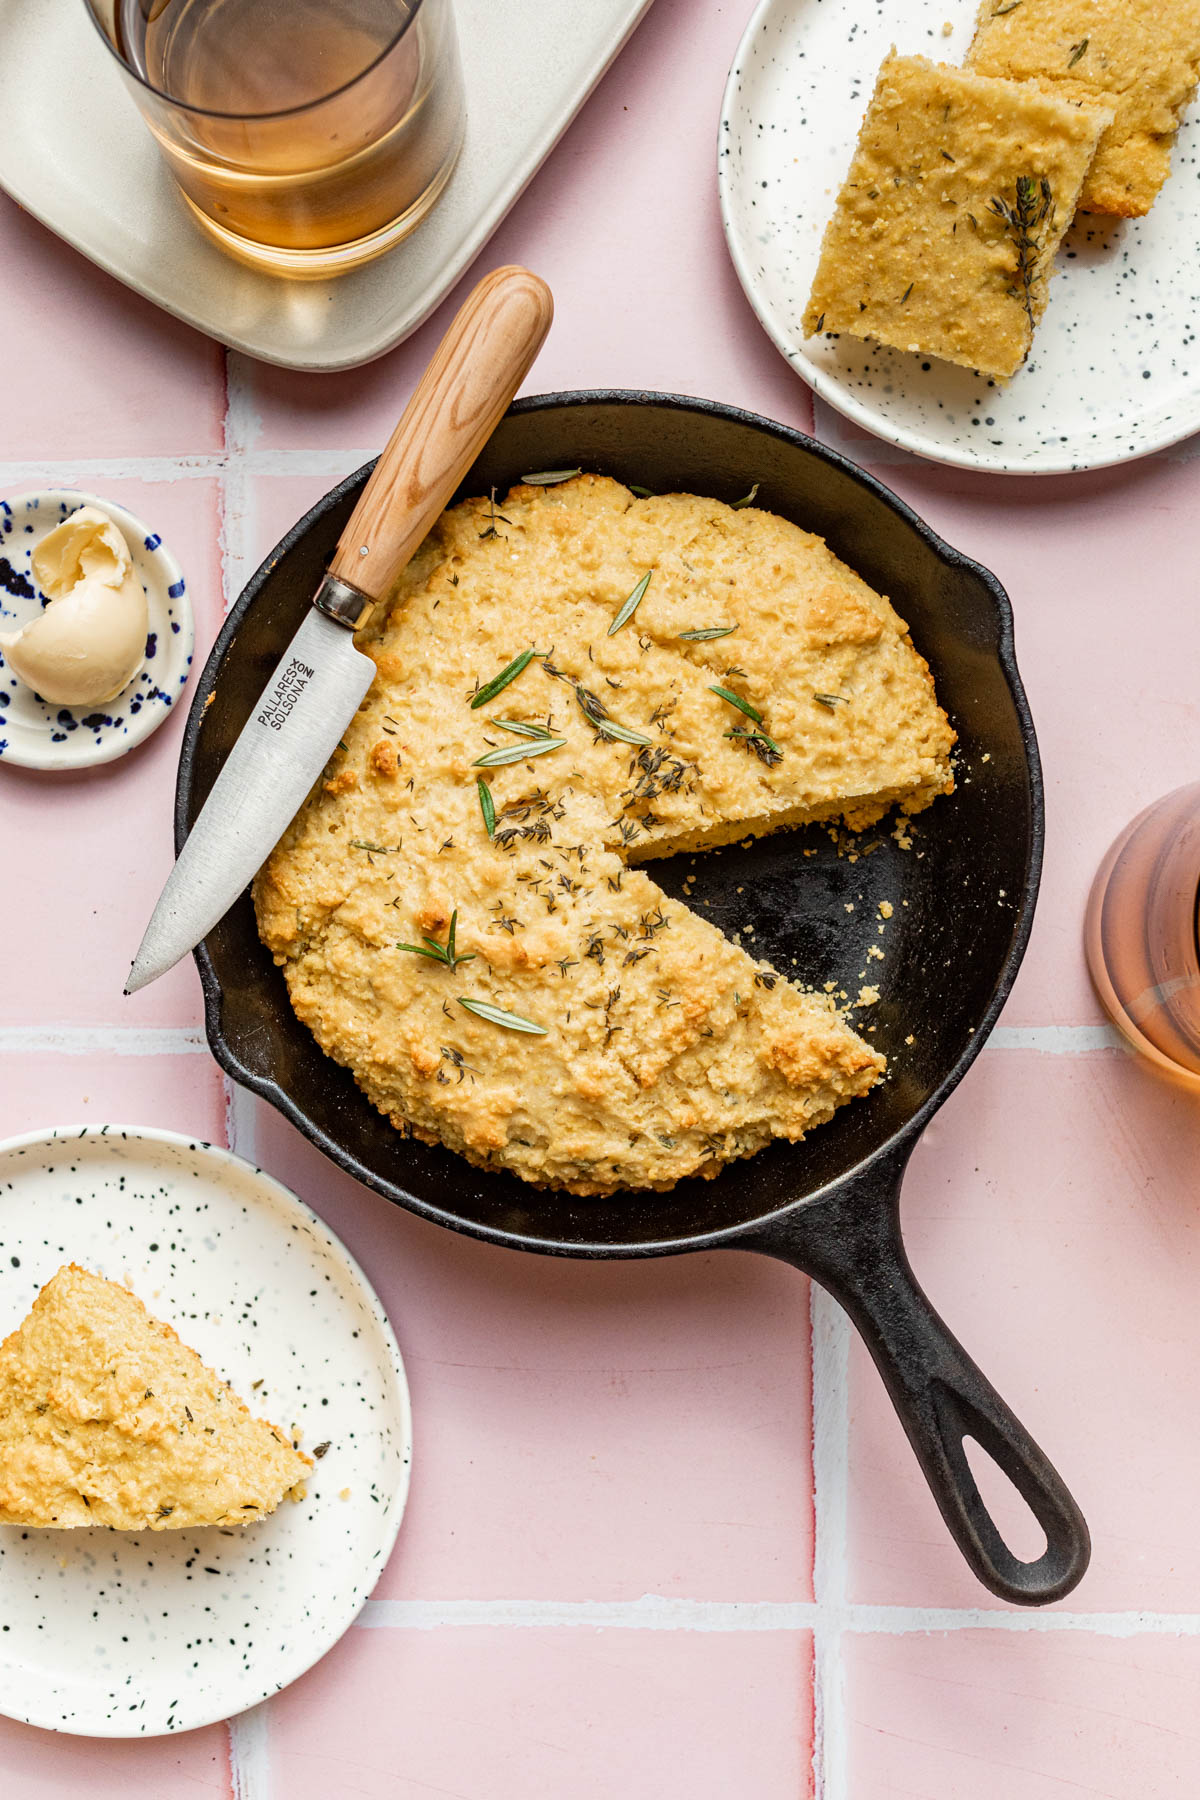 Cornbread in a skillet with a wedge cut out.